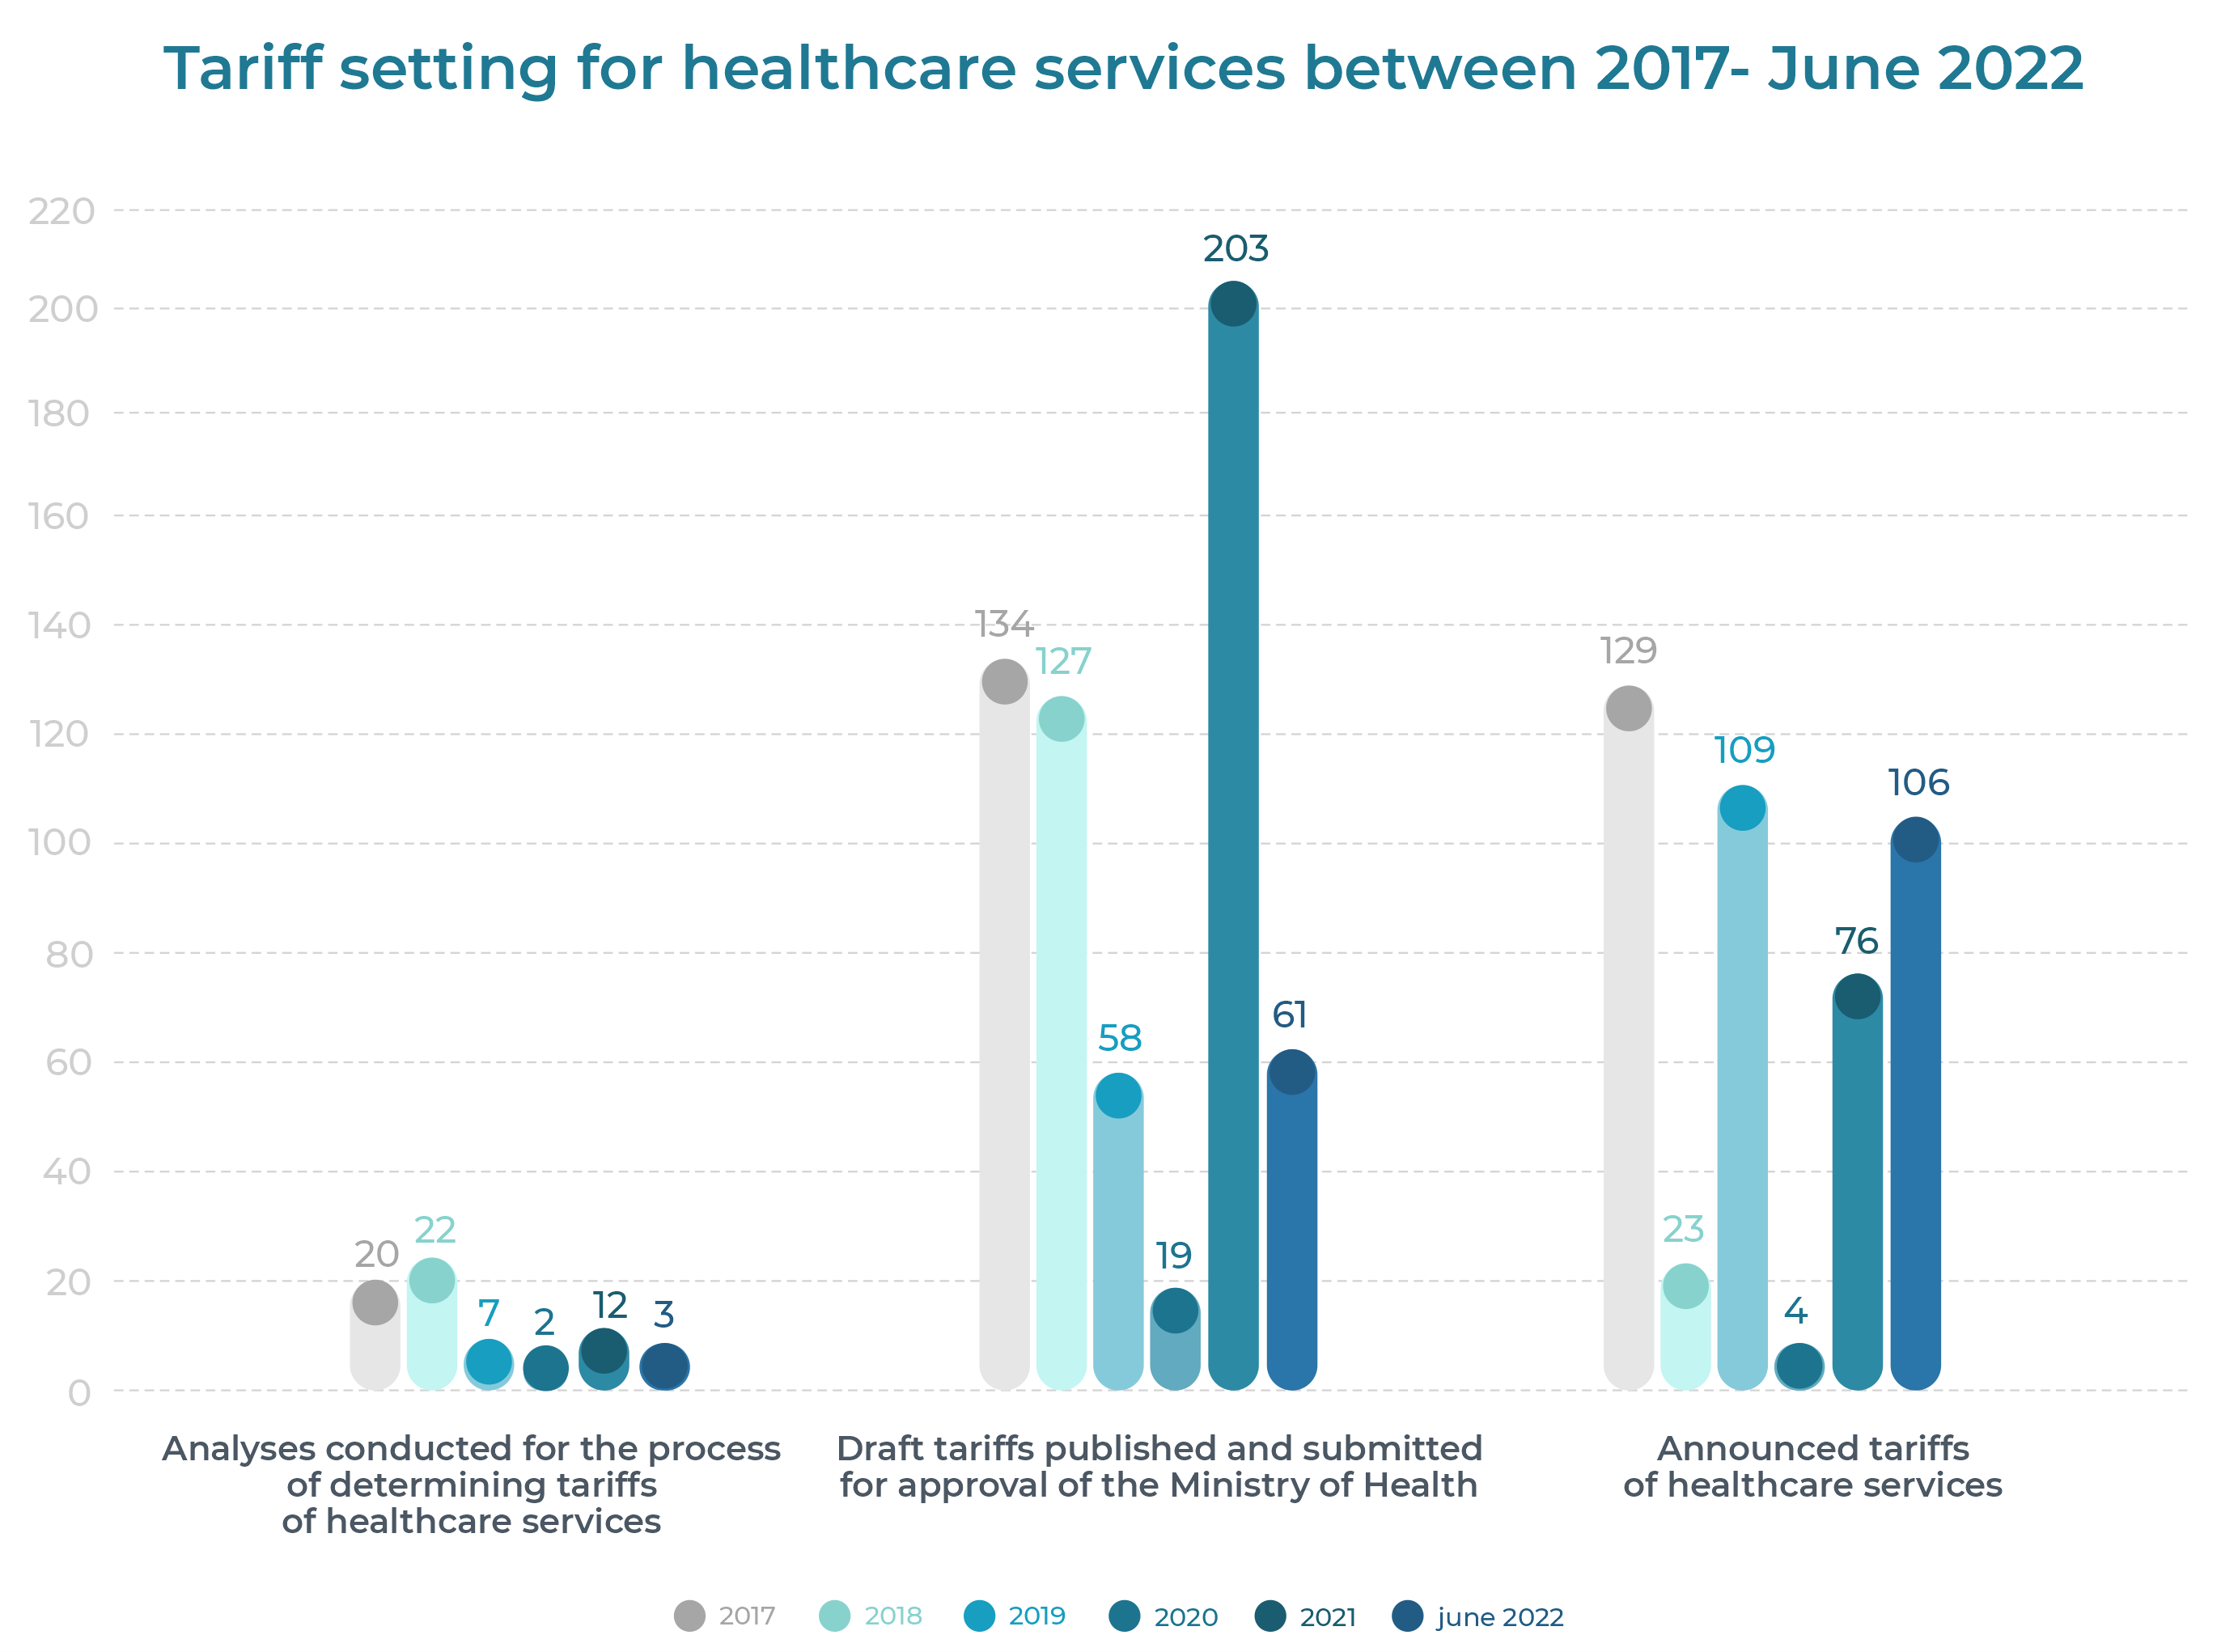 Tariff setting for healthcare services between 2017 - June 2022